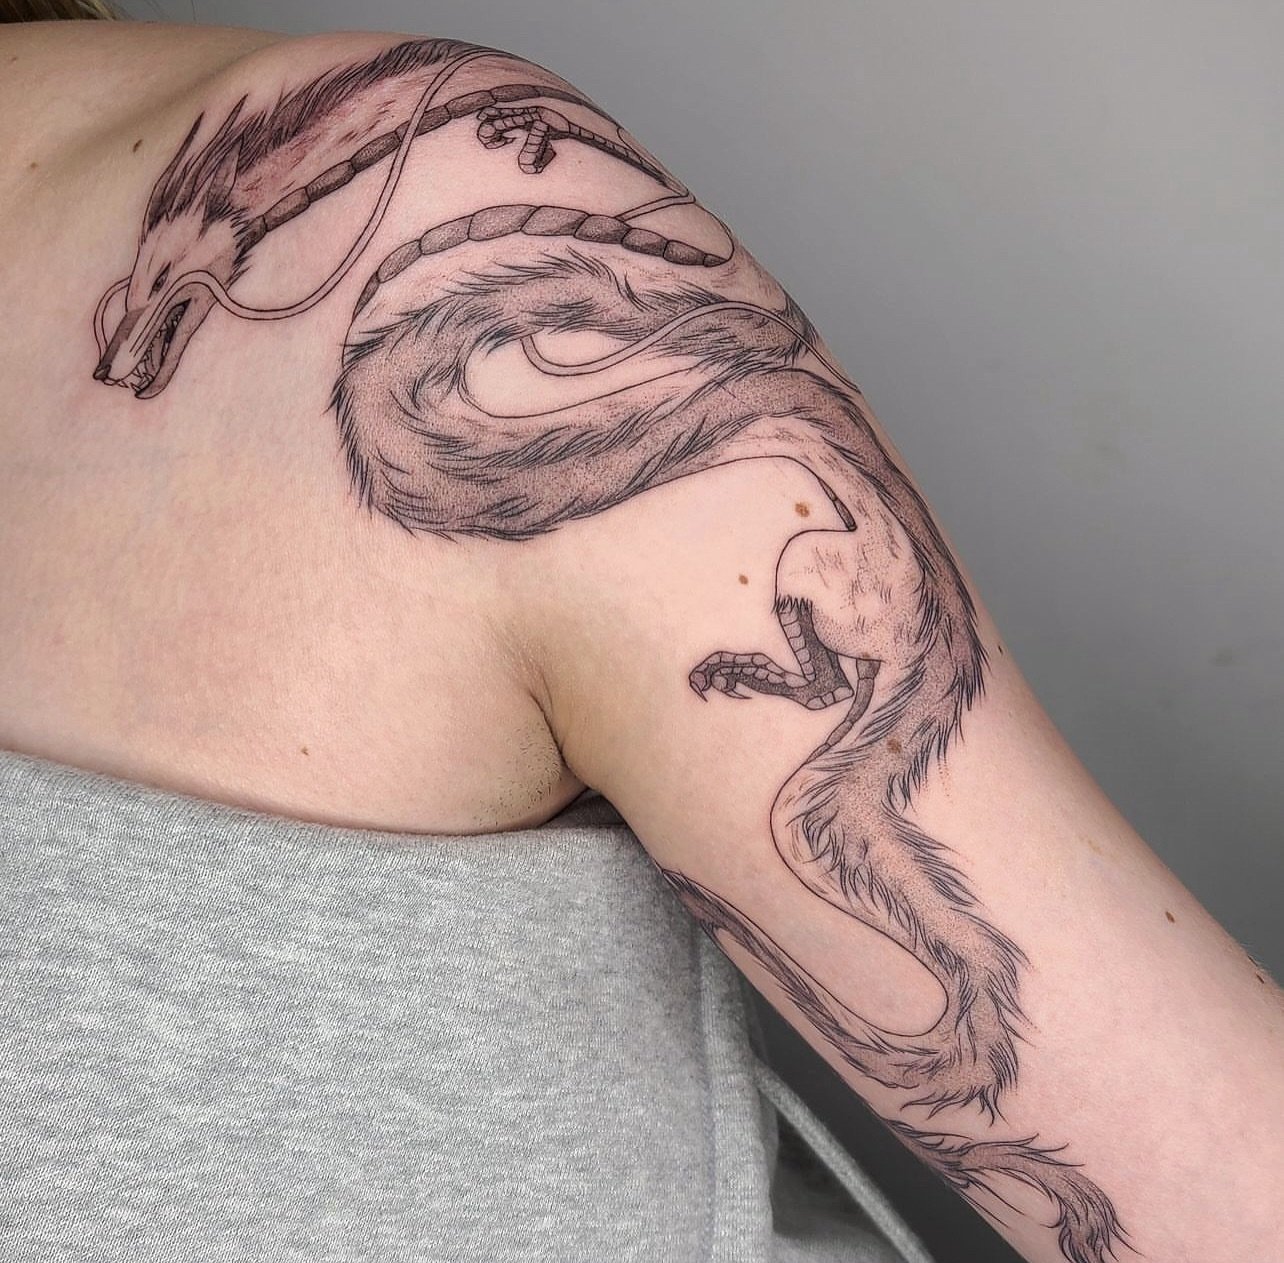 Haku 🐉 
Artist: @alcaterin.tattoo 
________________________________________________
[At Off the Ground Ink, we bring your tattoo ideas to life! 💭 For bookings and inquiries, reach out to us by email at offthegroundink@gmail.com]
.
.
.
.
.
#tattoo #